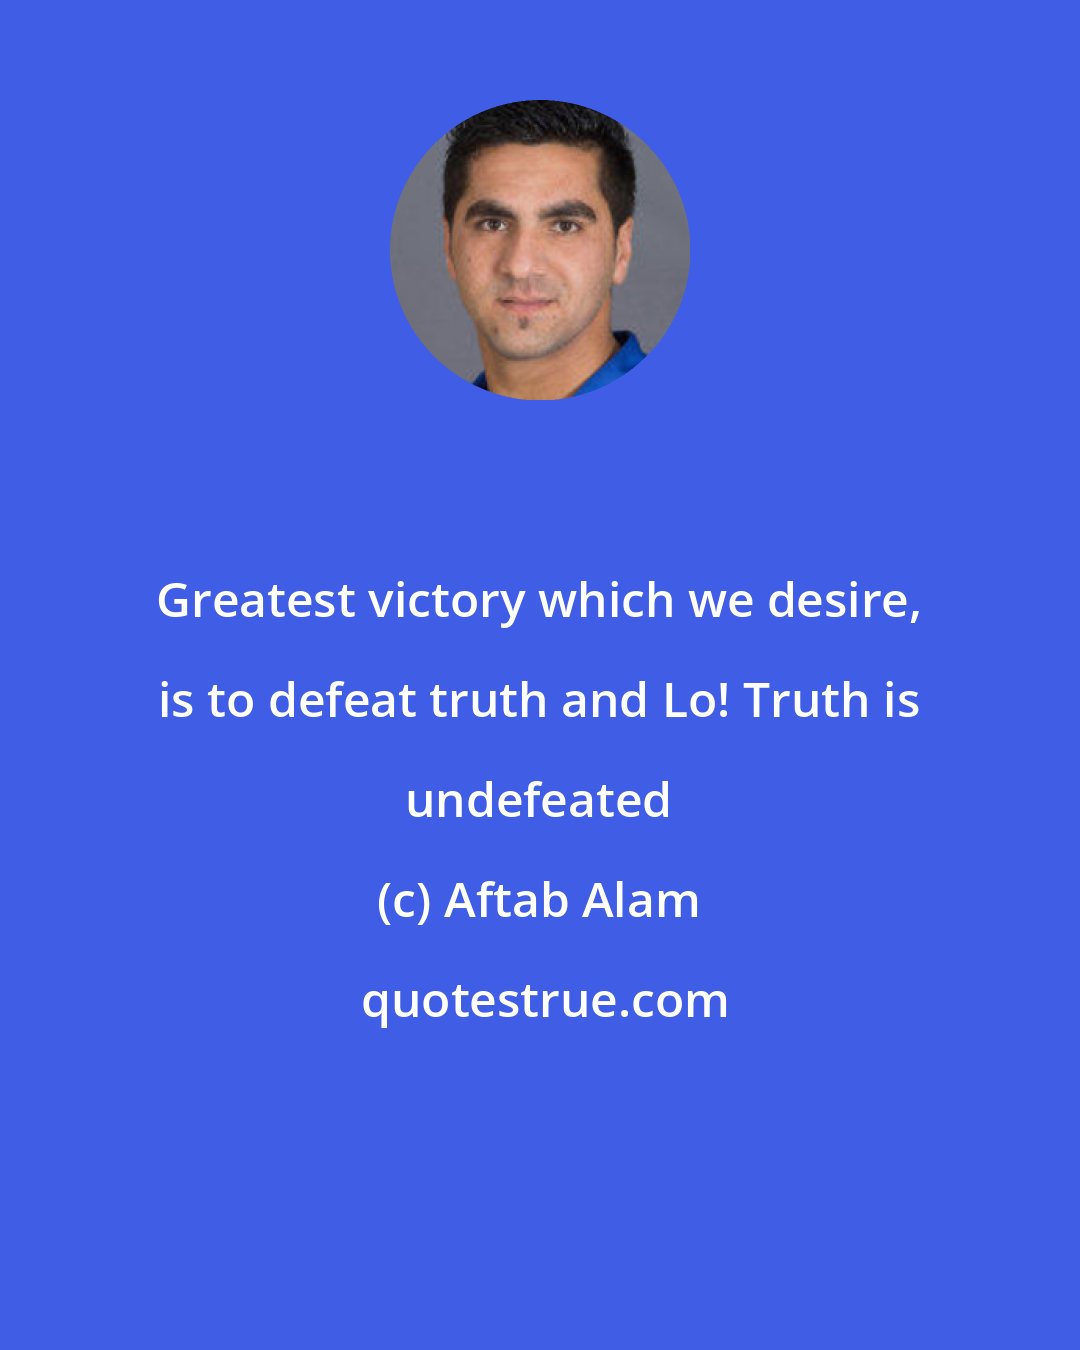 Aftab Alam: Greatest victory which we desire, is to defeat truth and Lo! Truth is undefeated